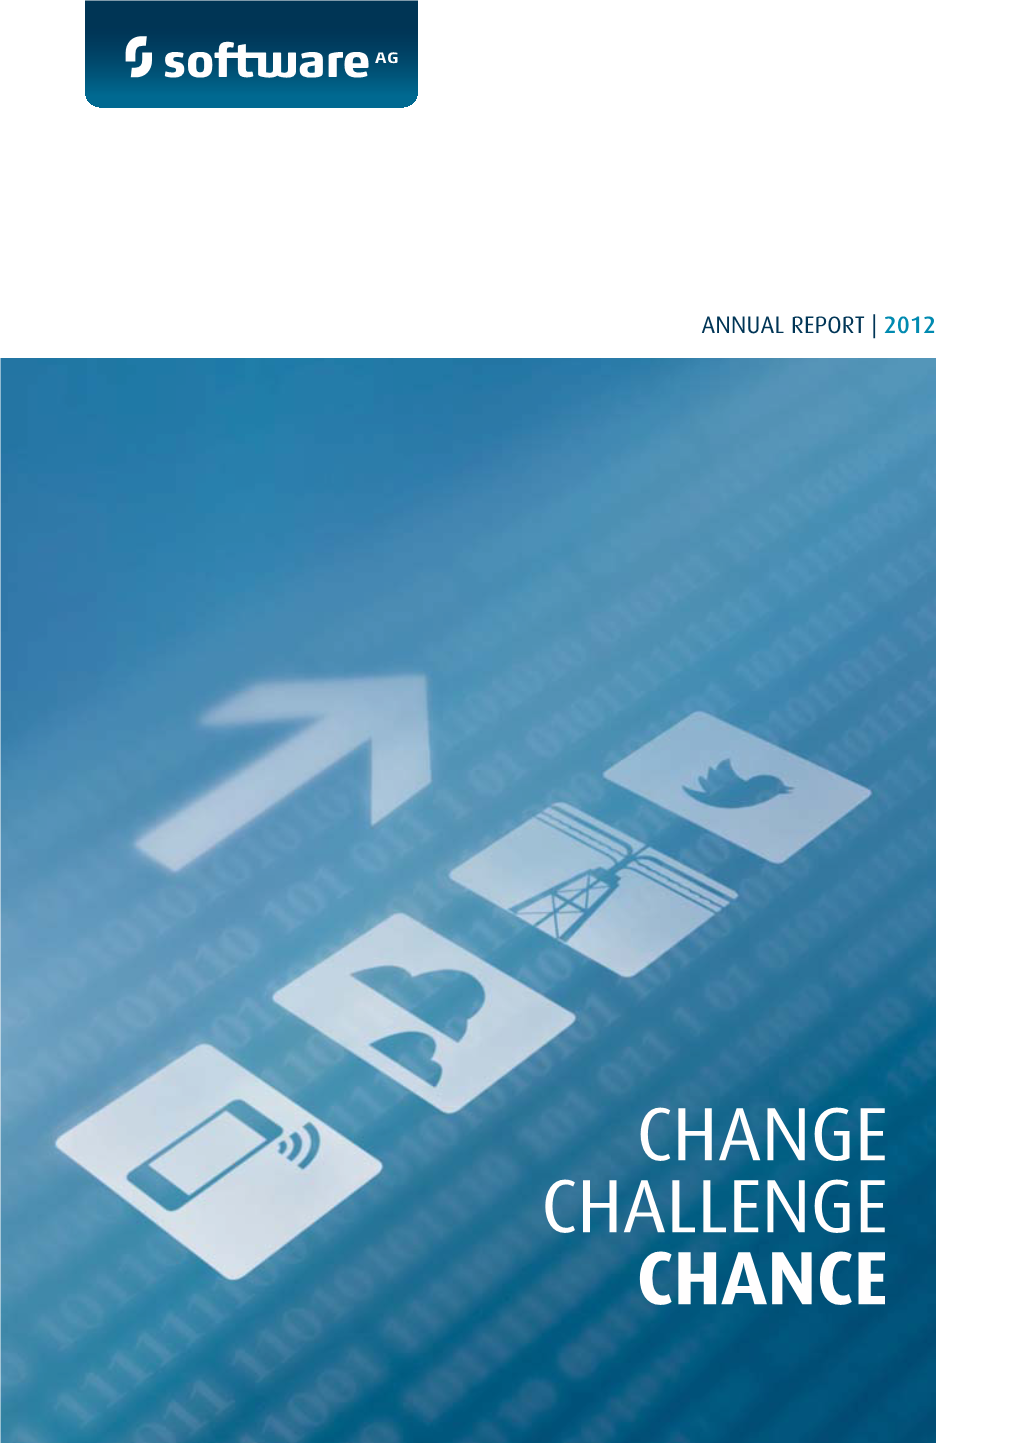 Change Challenge Chance Software Ag | Annual Report 2012